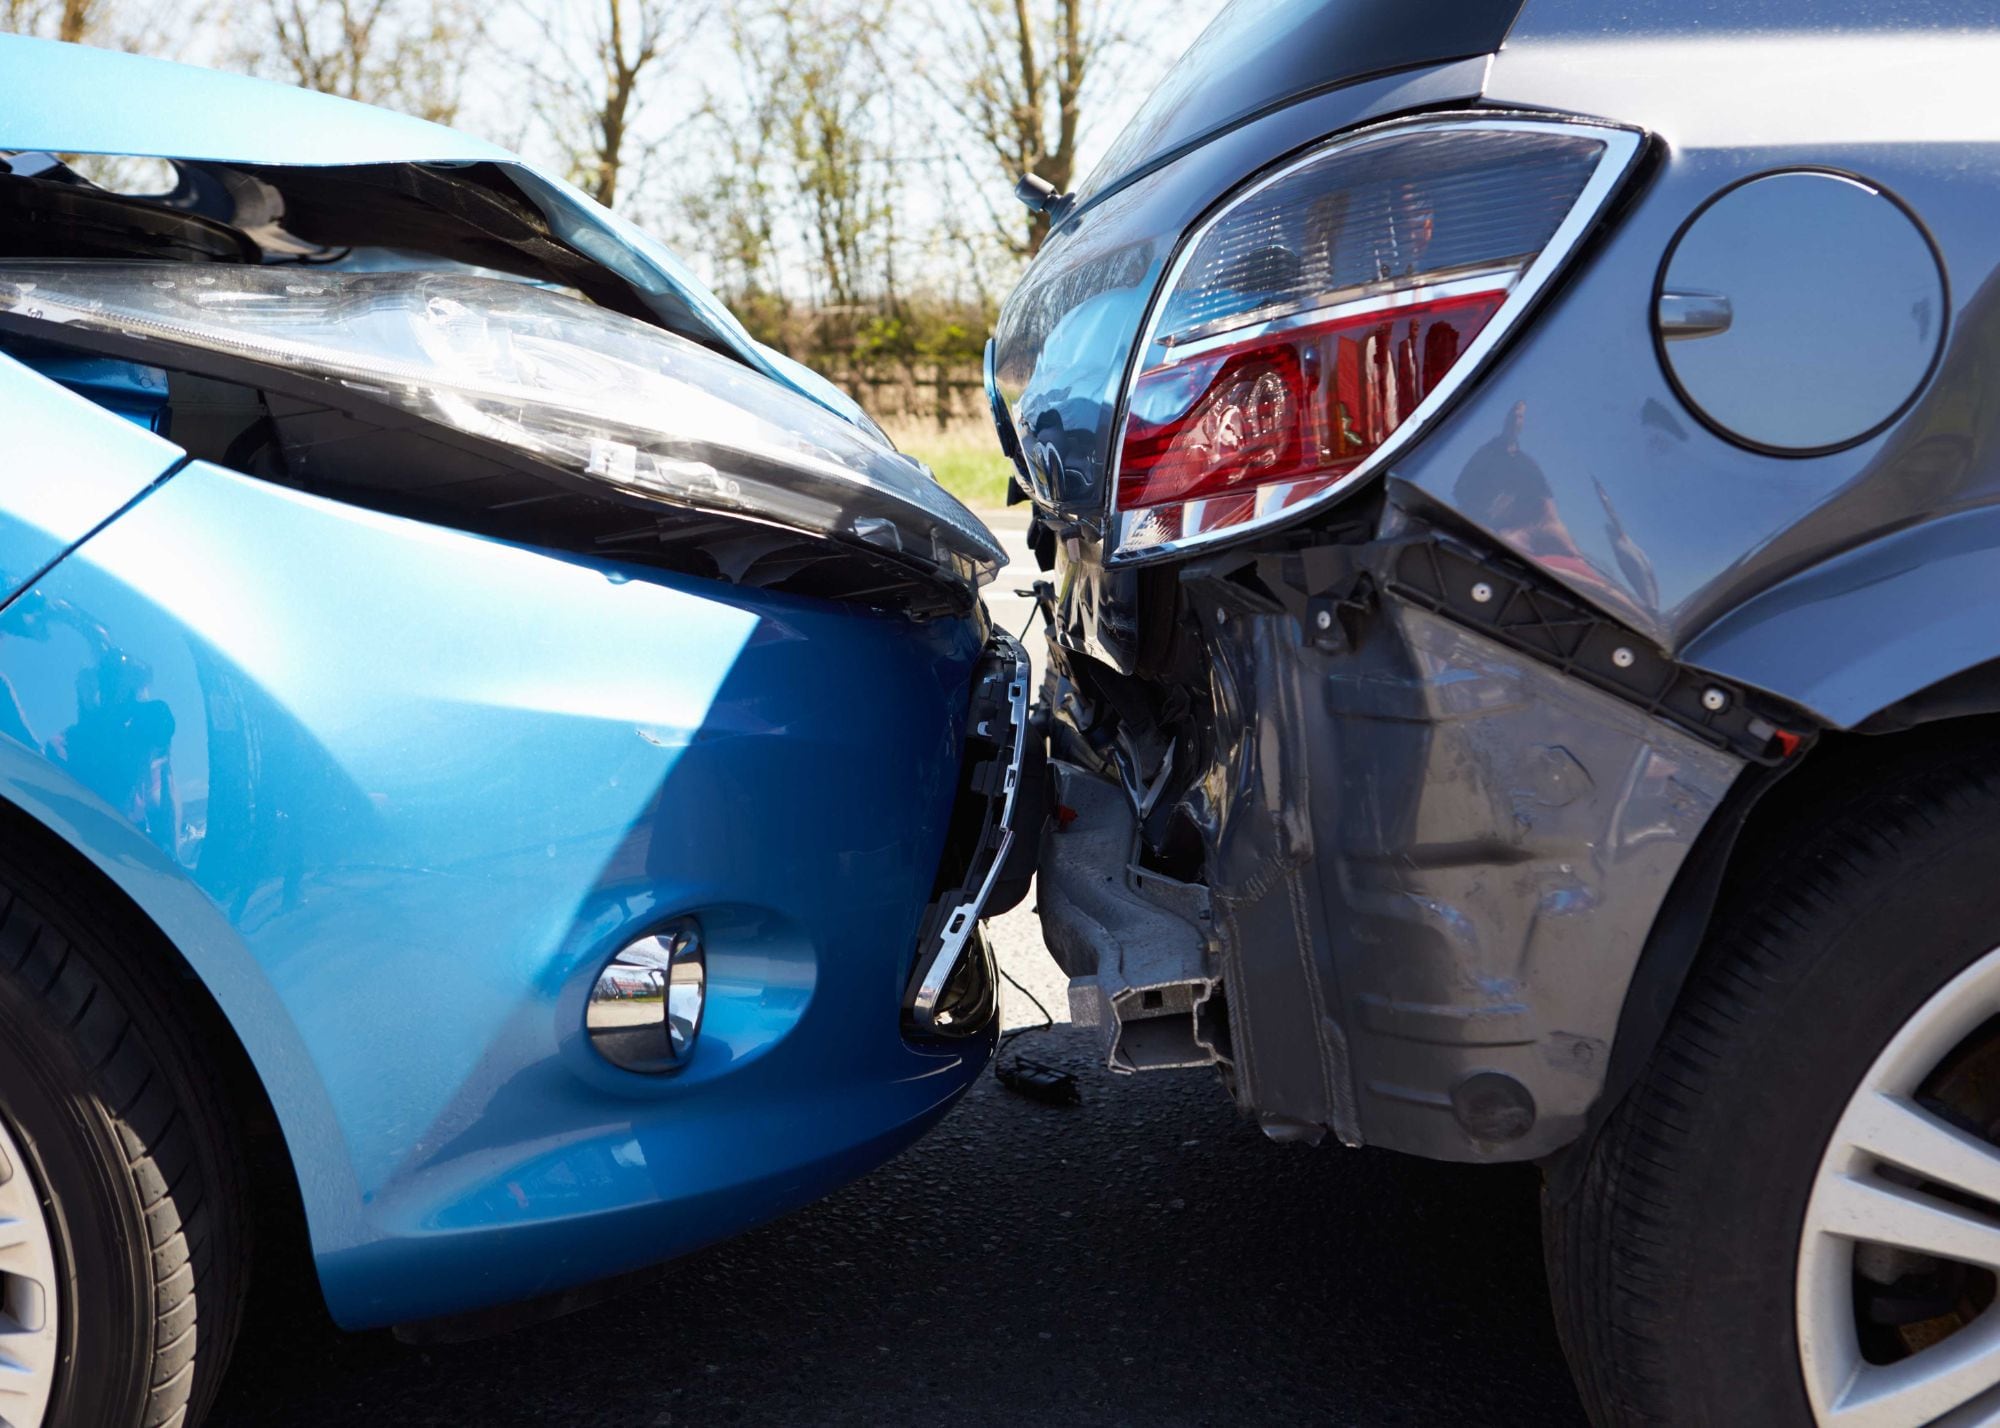 Understanding just what is SR22 Car Accident Insurance options for Seattle residents